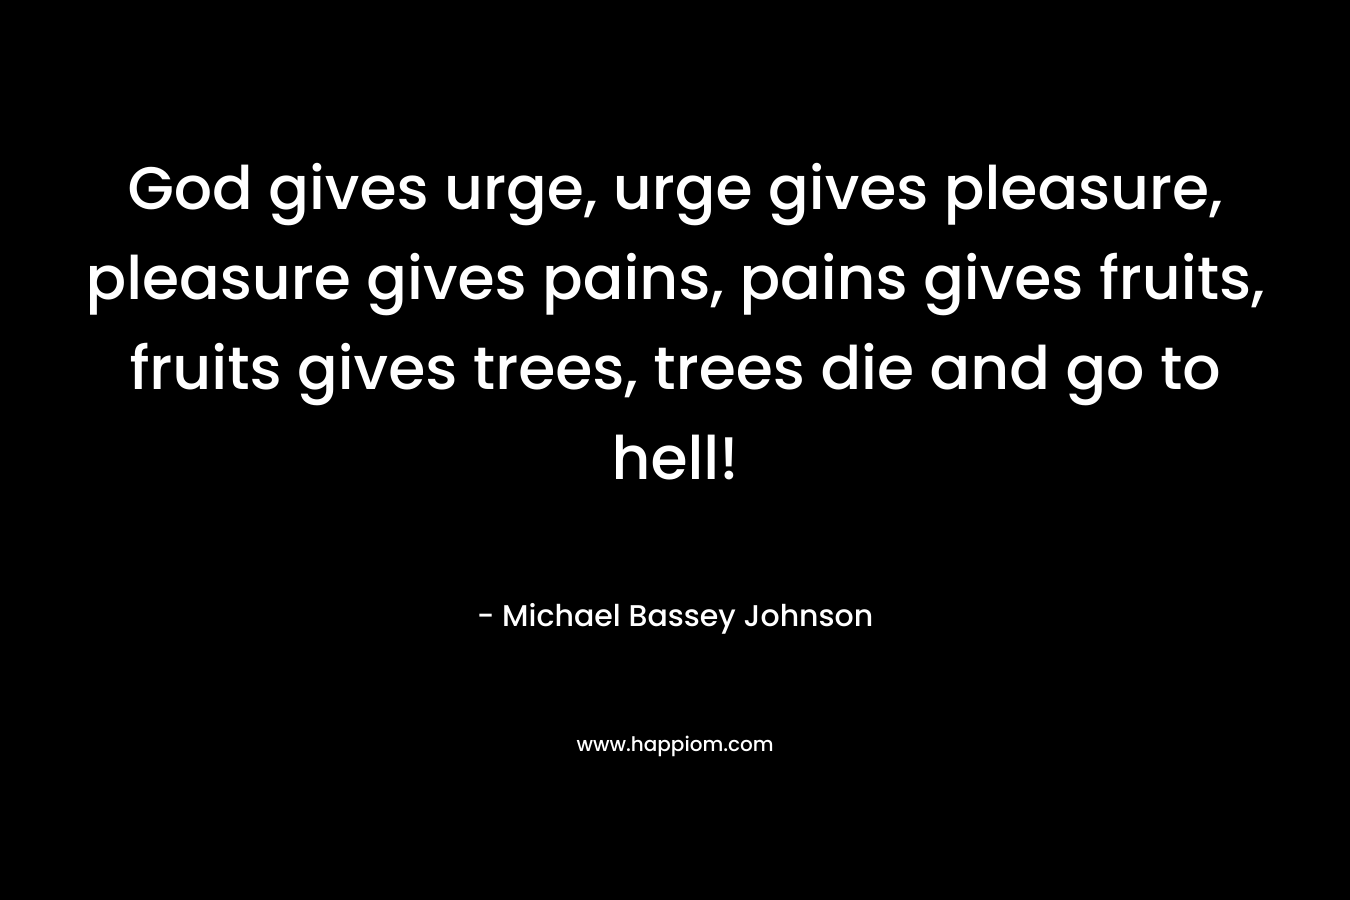 God gives urge, urge gives pleasure, pleasure gives pains, pains gives fruits, fruits gives trees, trees die and go to hell! – Michael Bassey Johnson